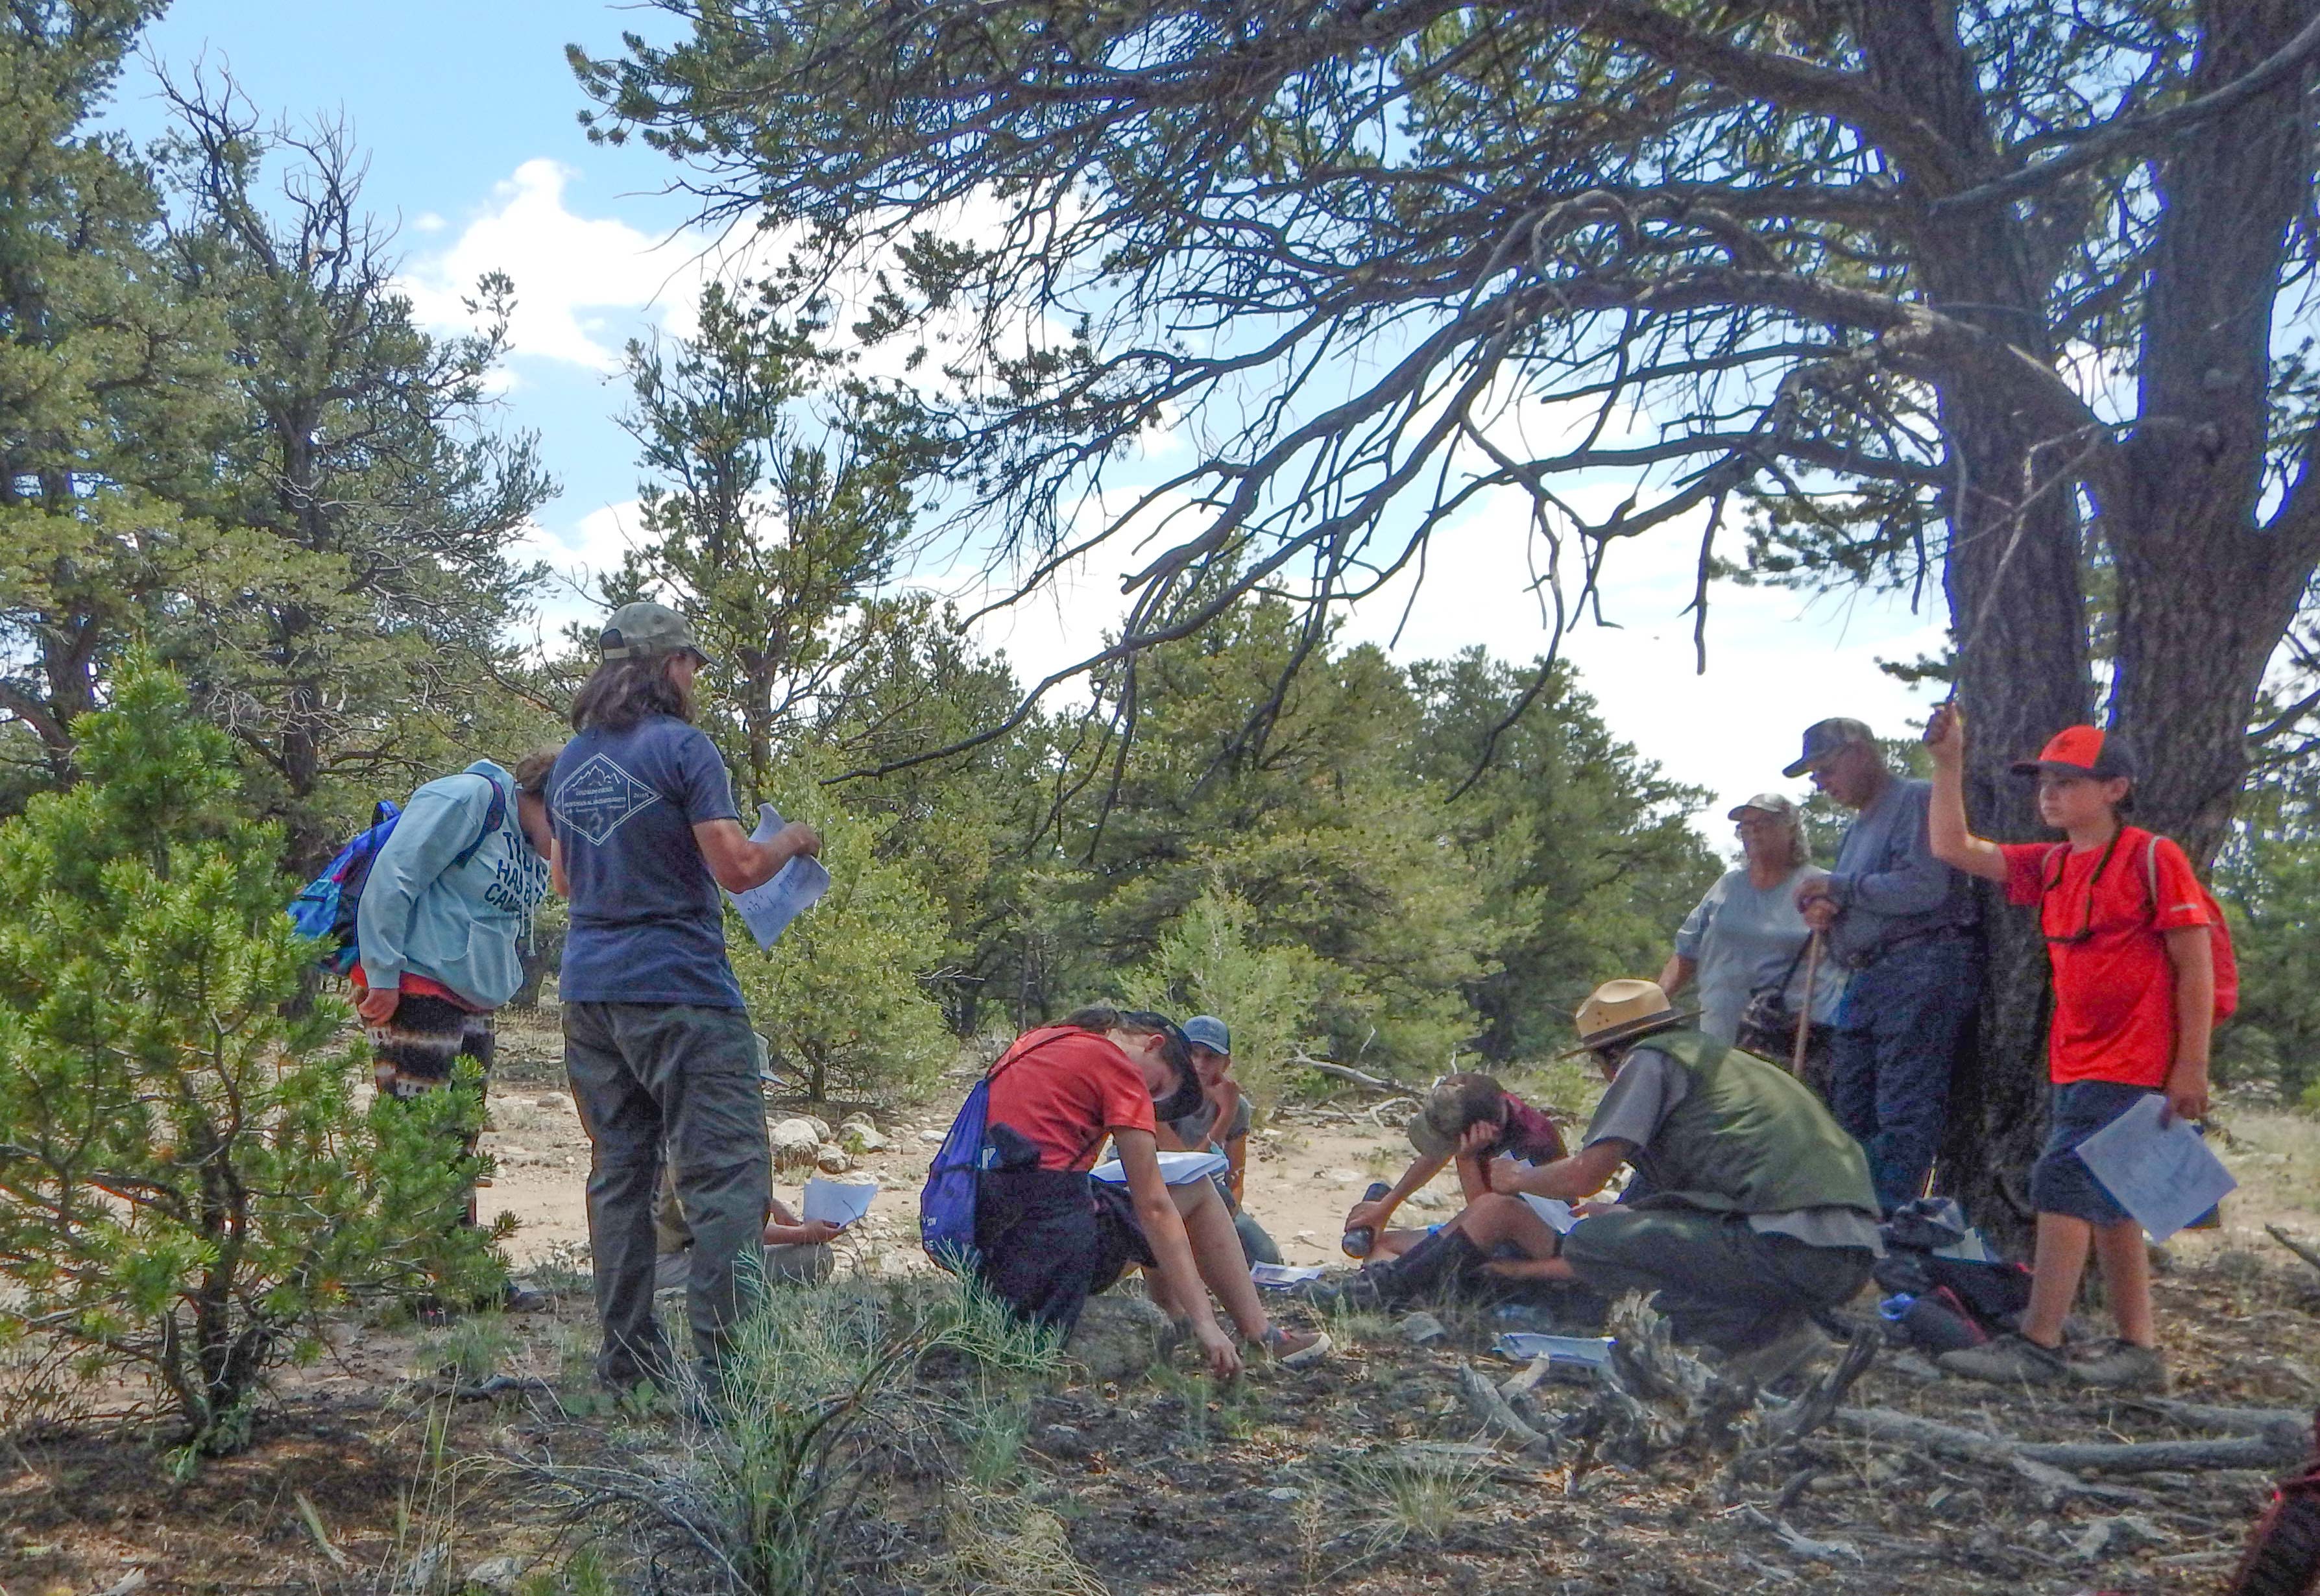 Youth and a ranger explore an archeological site under a pinon tree